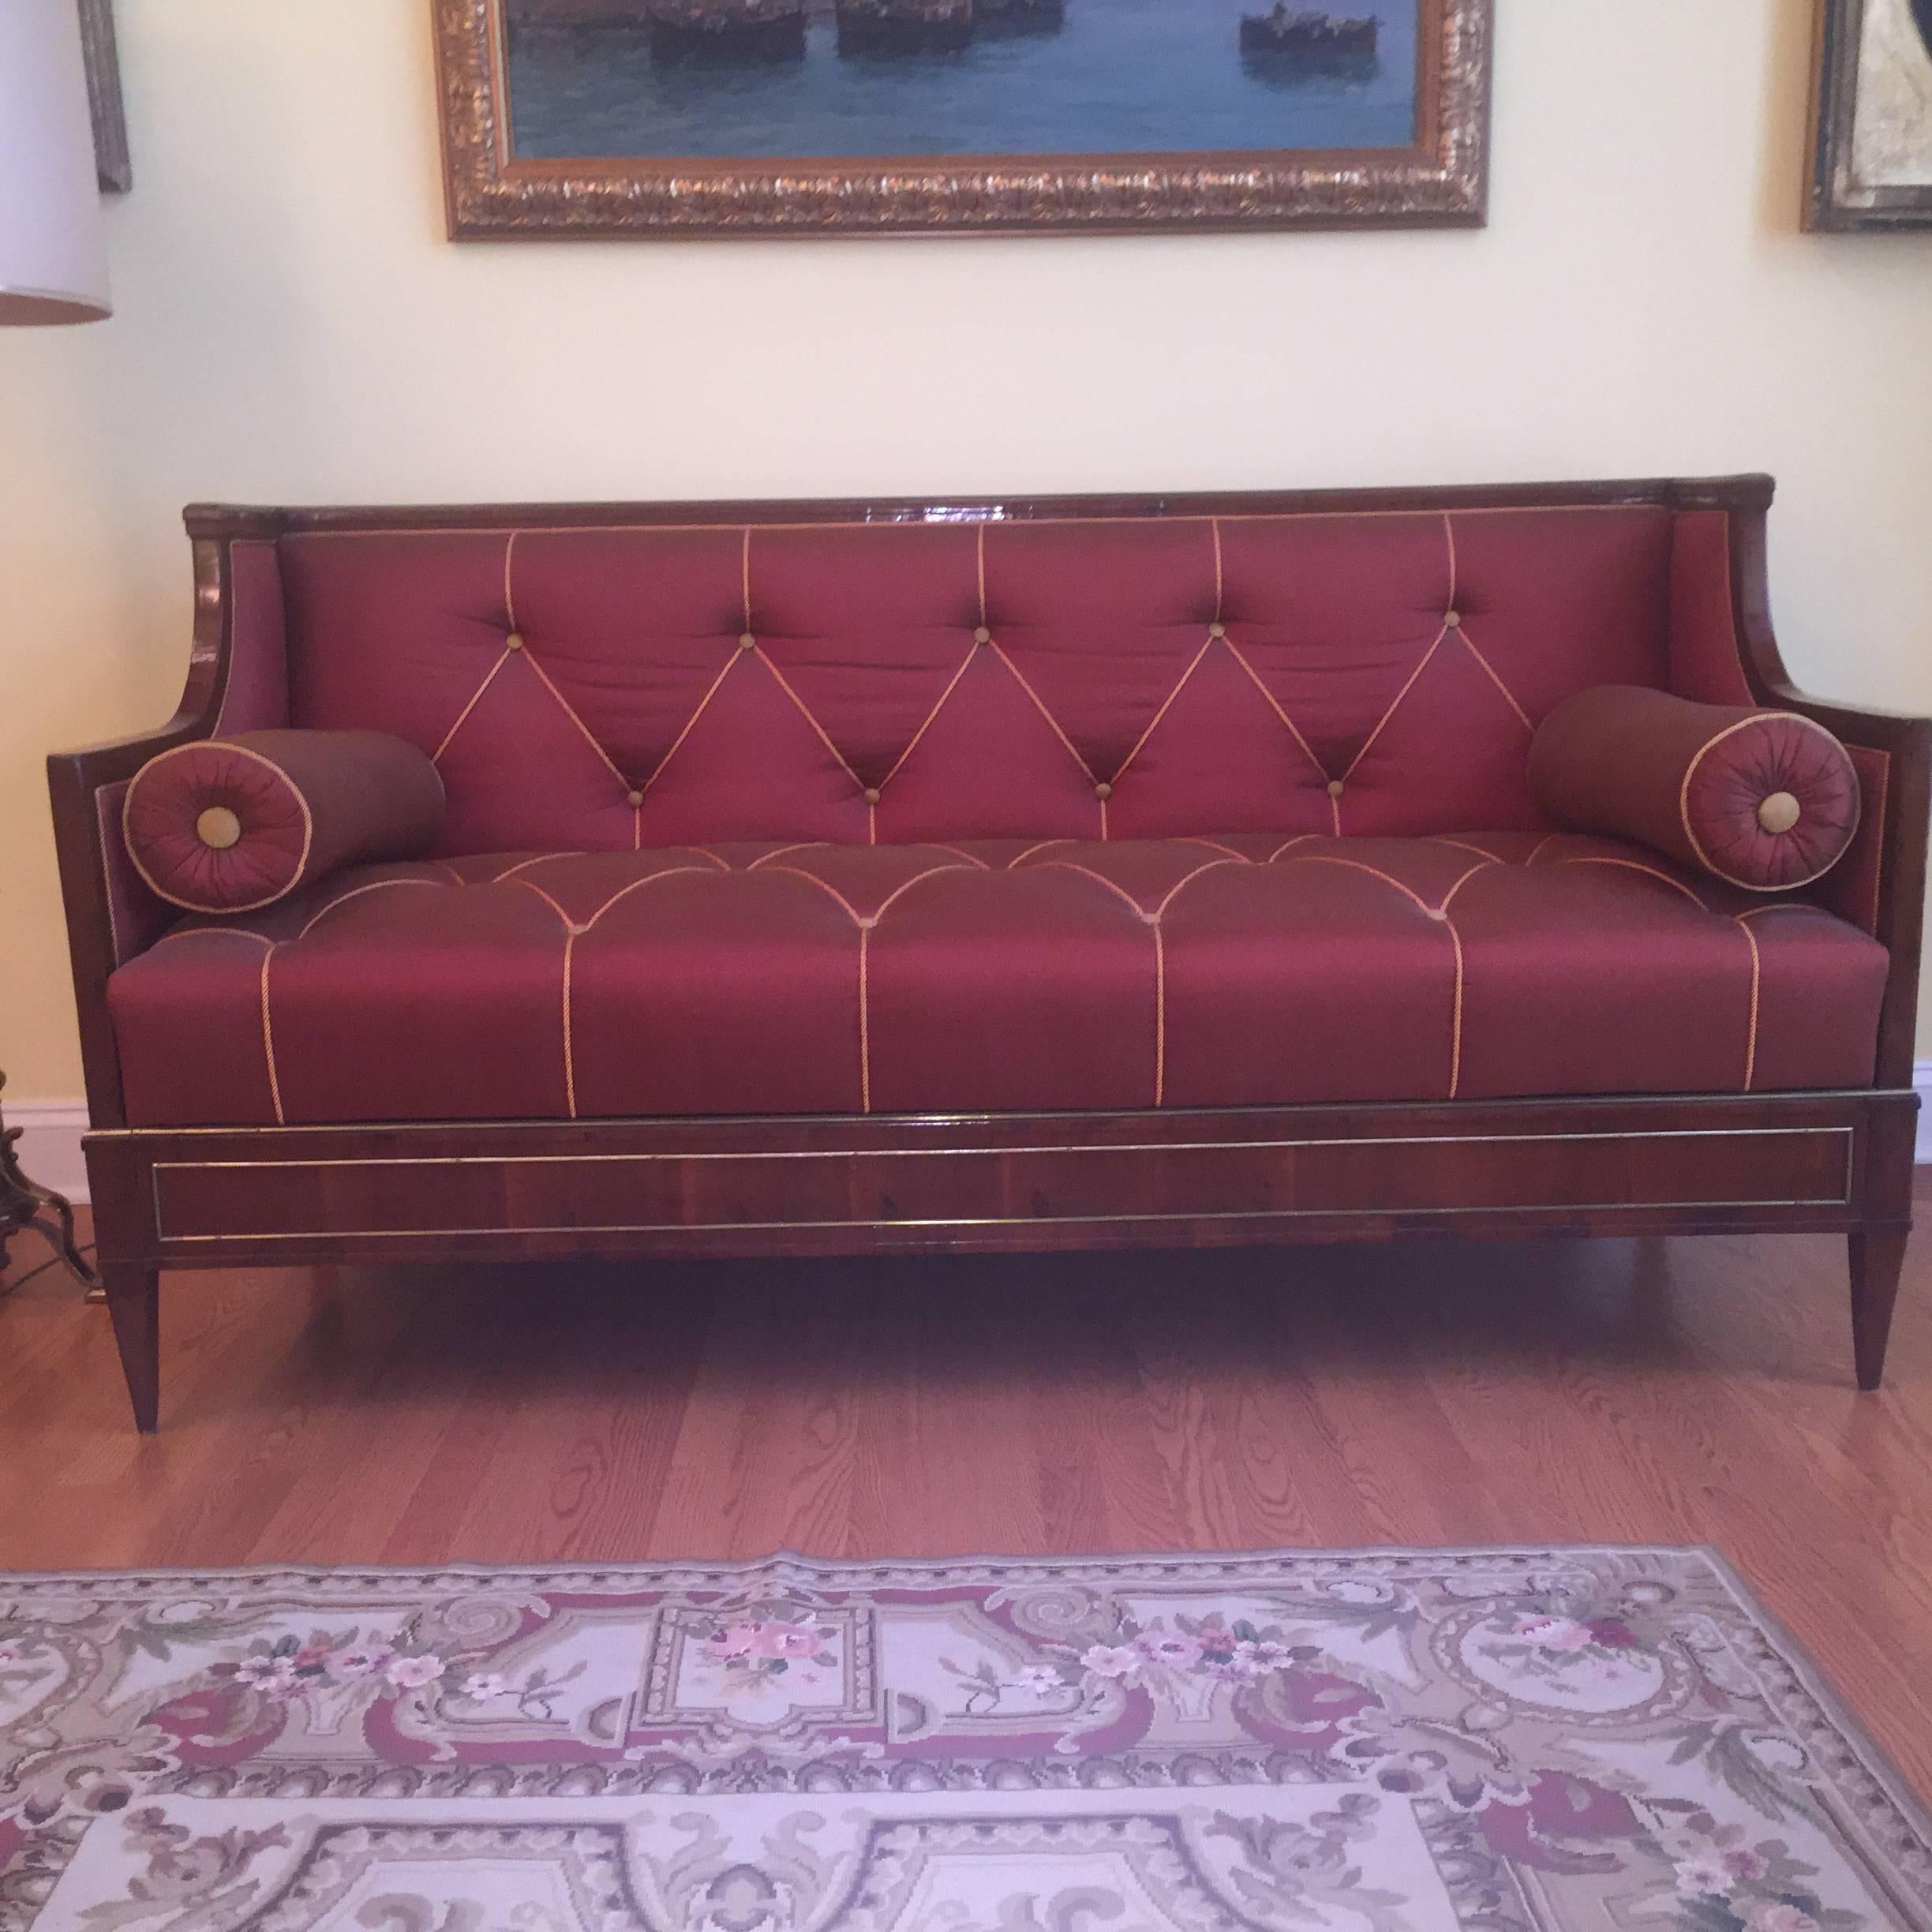 Early 19th Century Yew Wood Baltic Empire Sofa In Excellent Condition For Sale In Lambertville, NJ